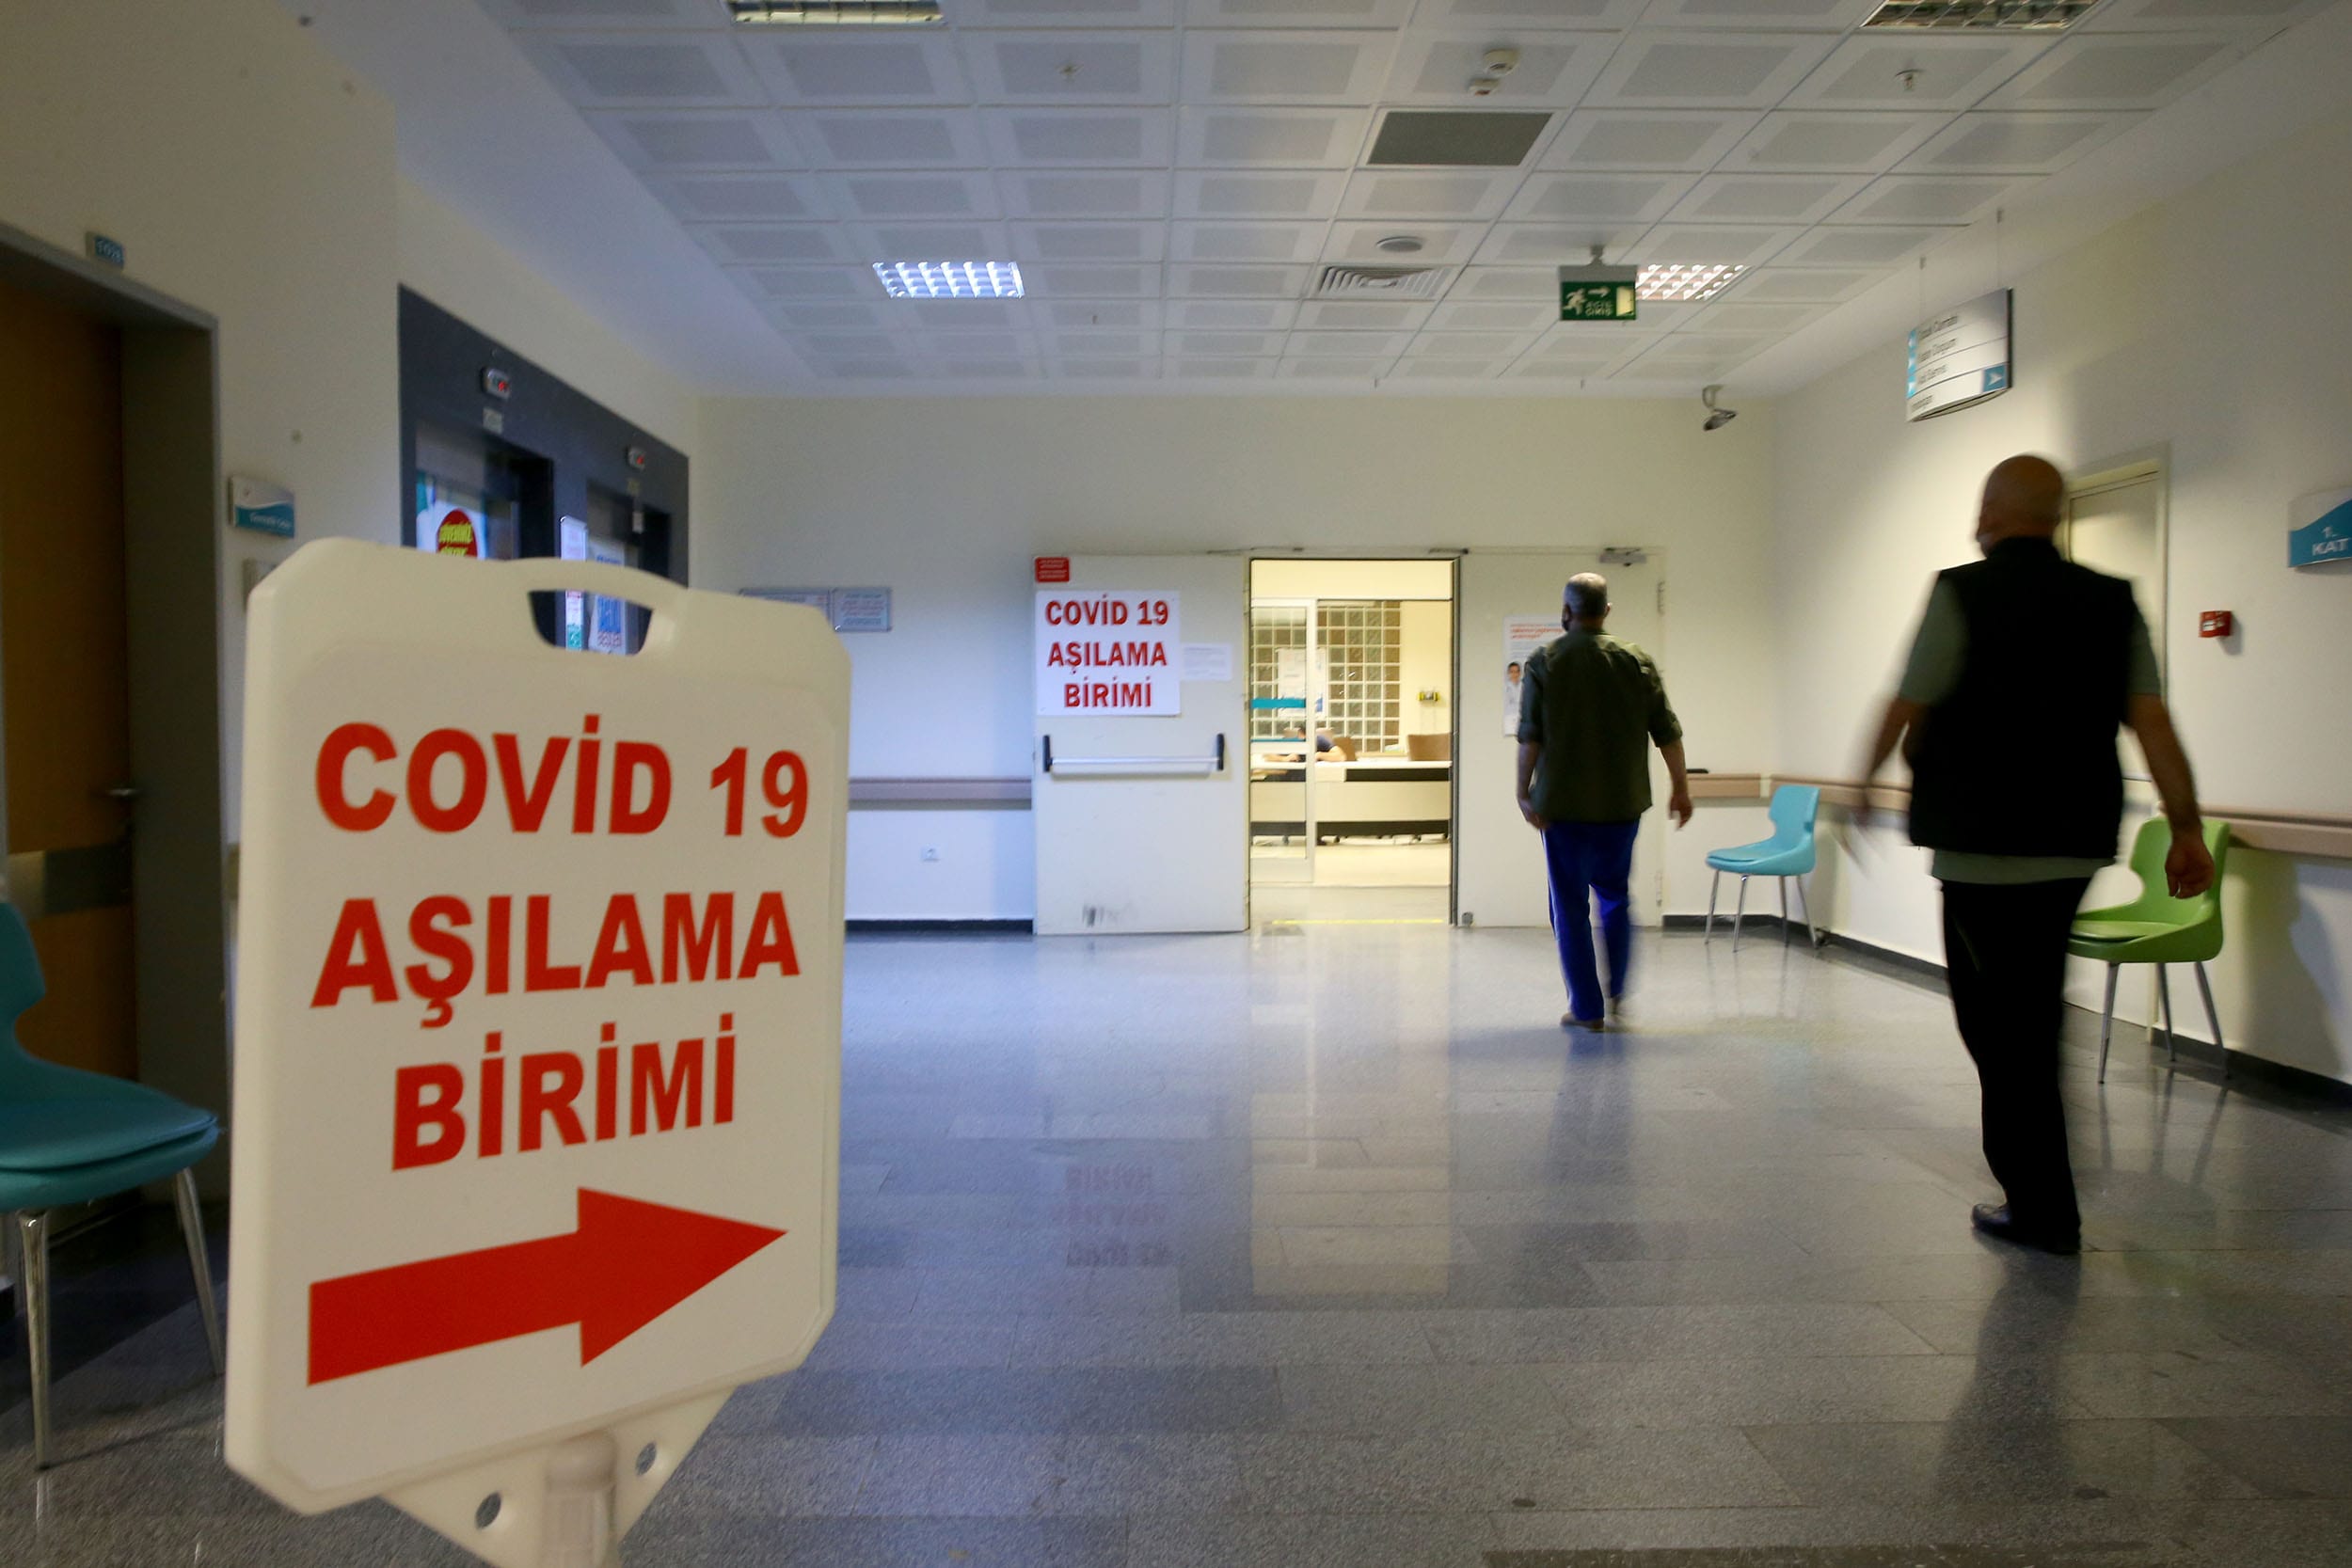 Fully vaccinated people in Turkey to receive vaccination IDs